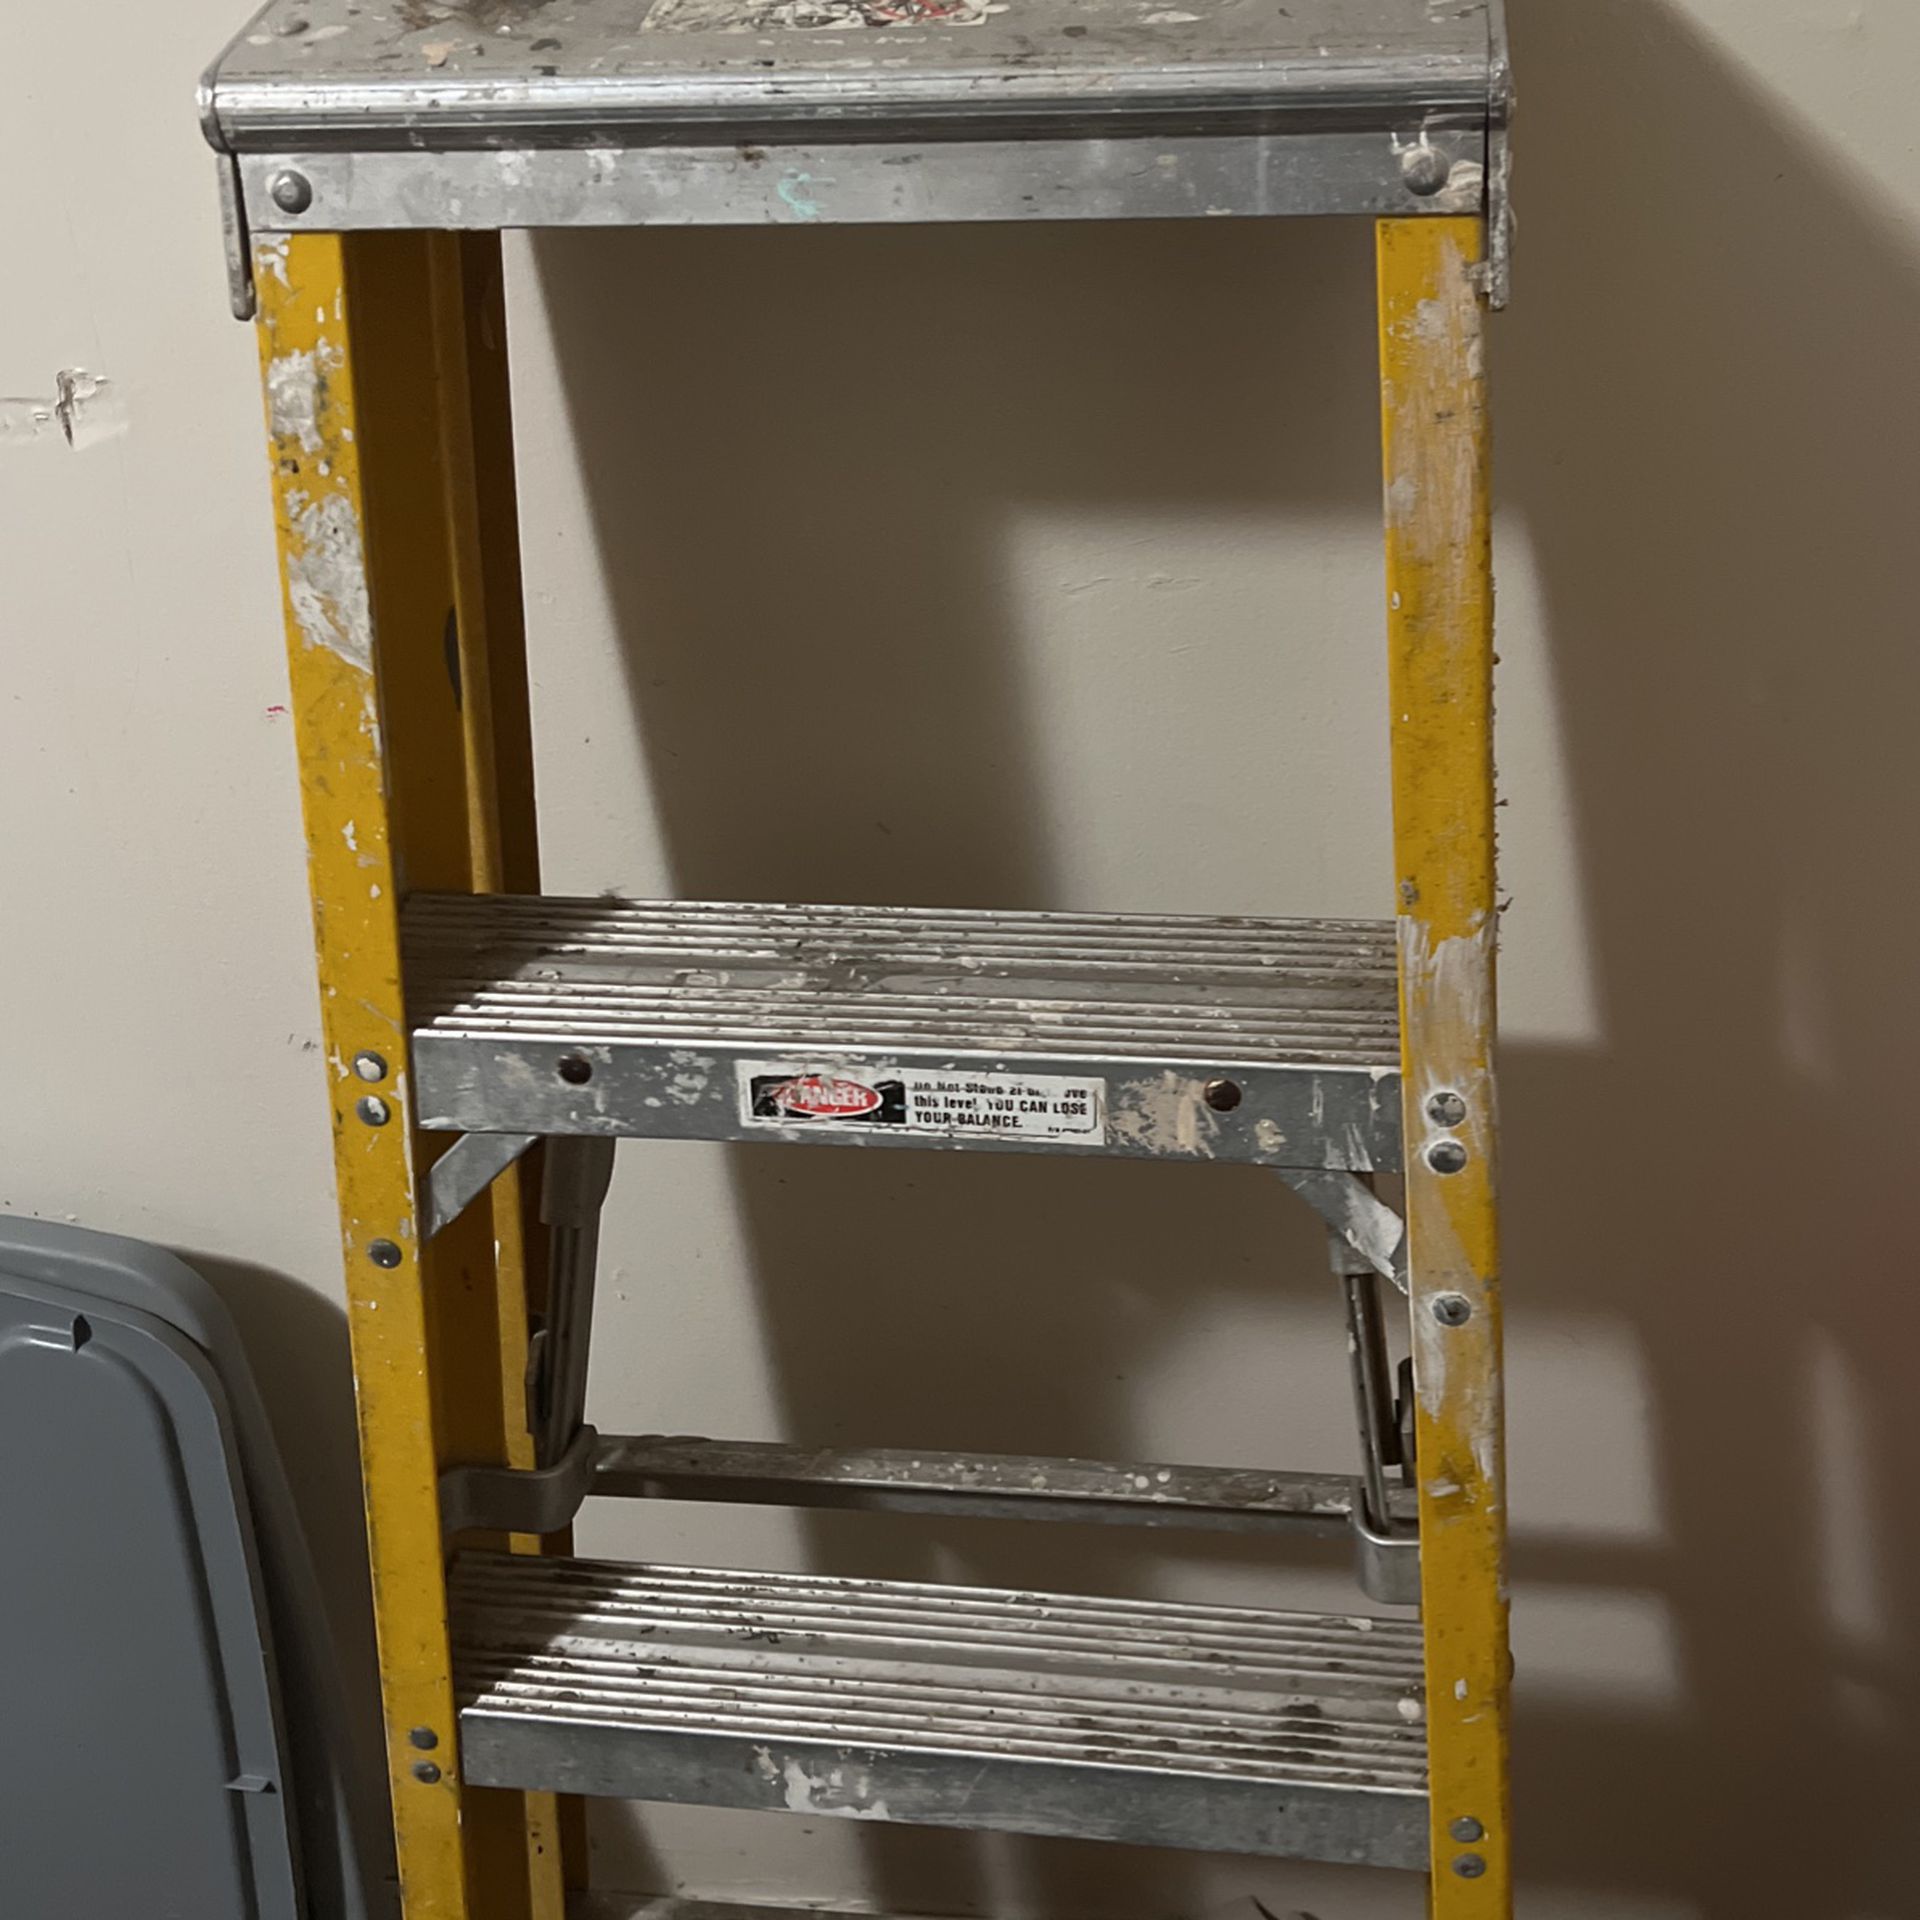 Dial 4 foot ladder for sale, great painting ladder